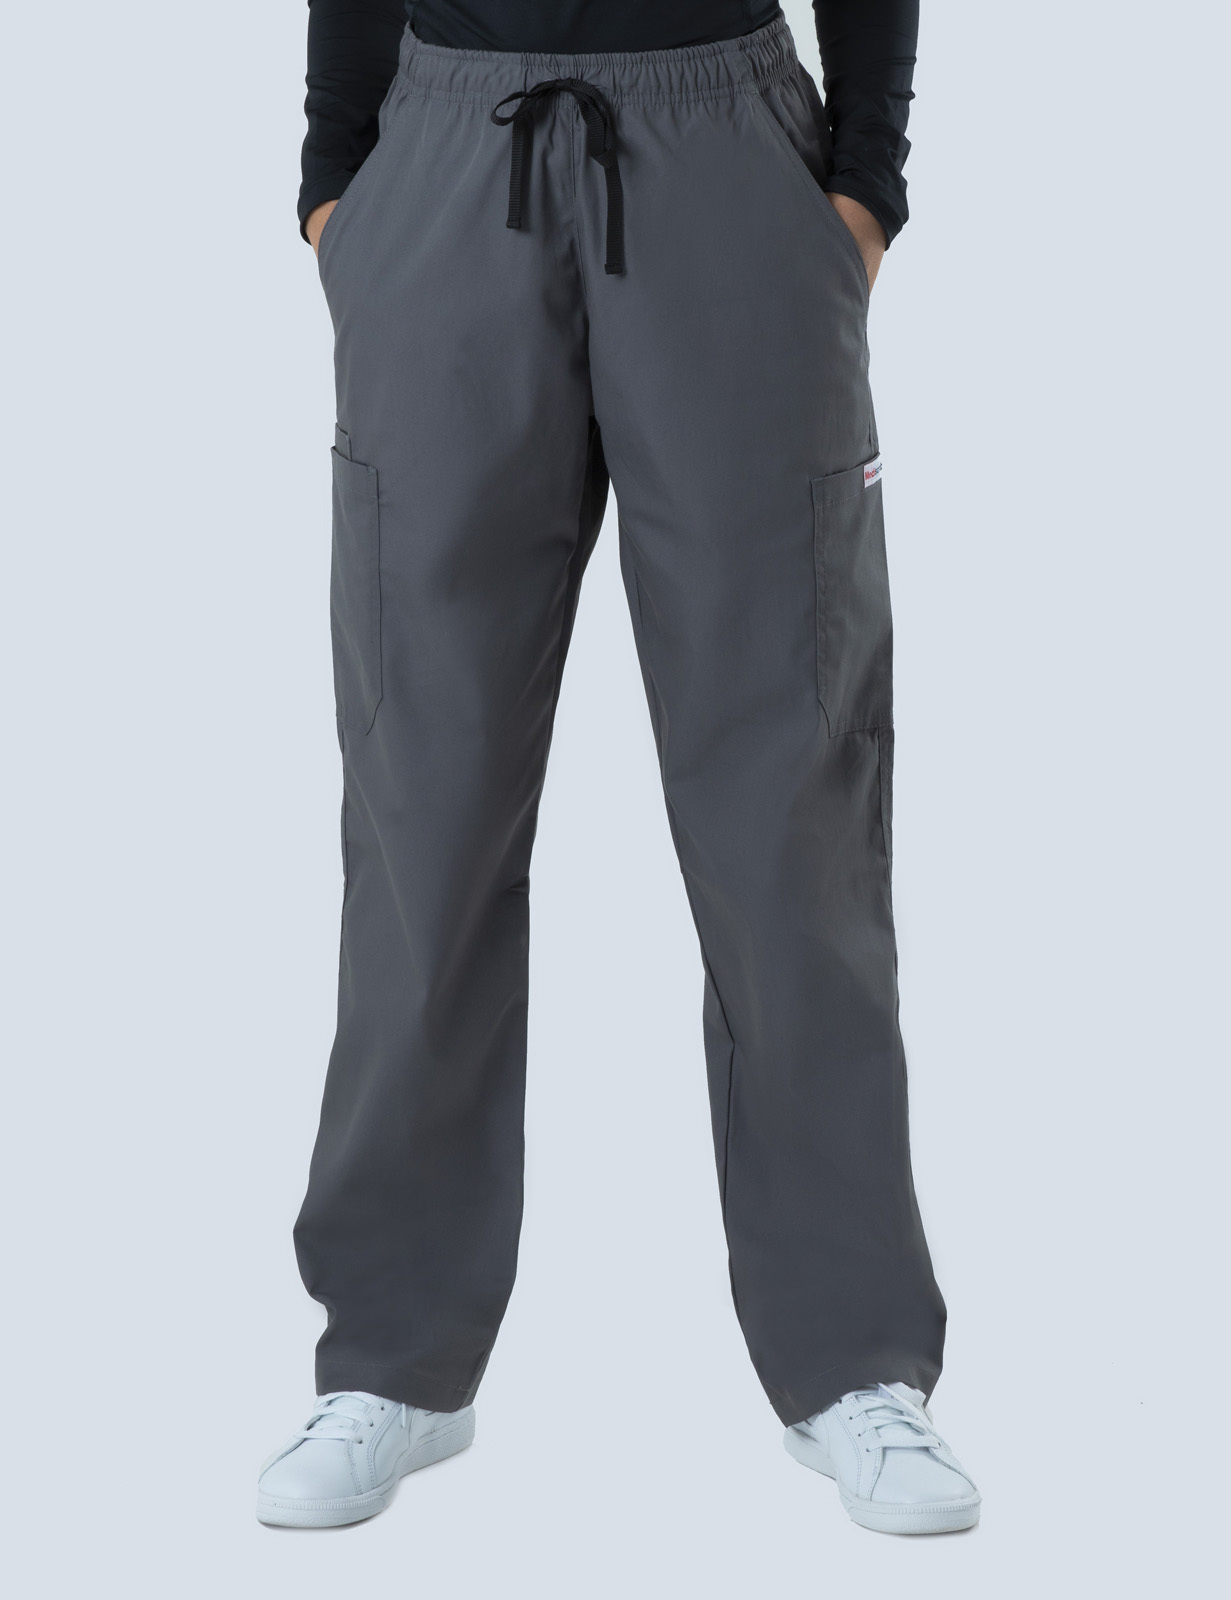 Ipswich Hospital - ED NP CNC (Women's Fit Solid Scrub Top and Cargo Pants in Steel Grey incl Logos)